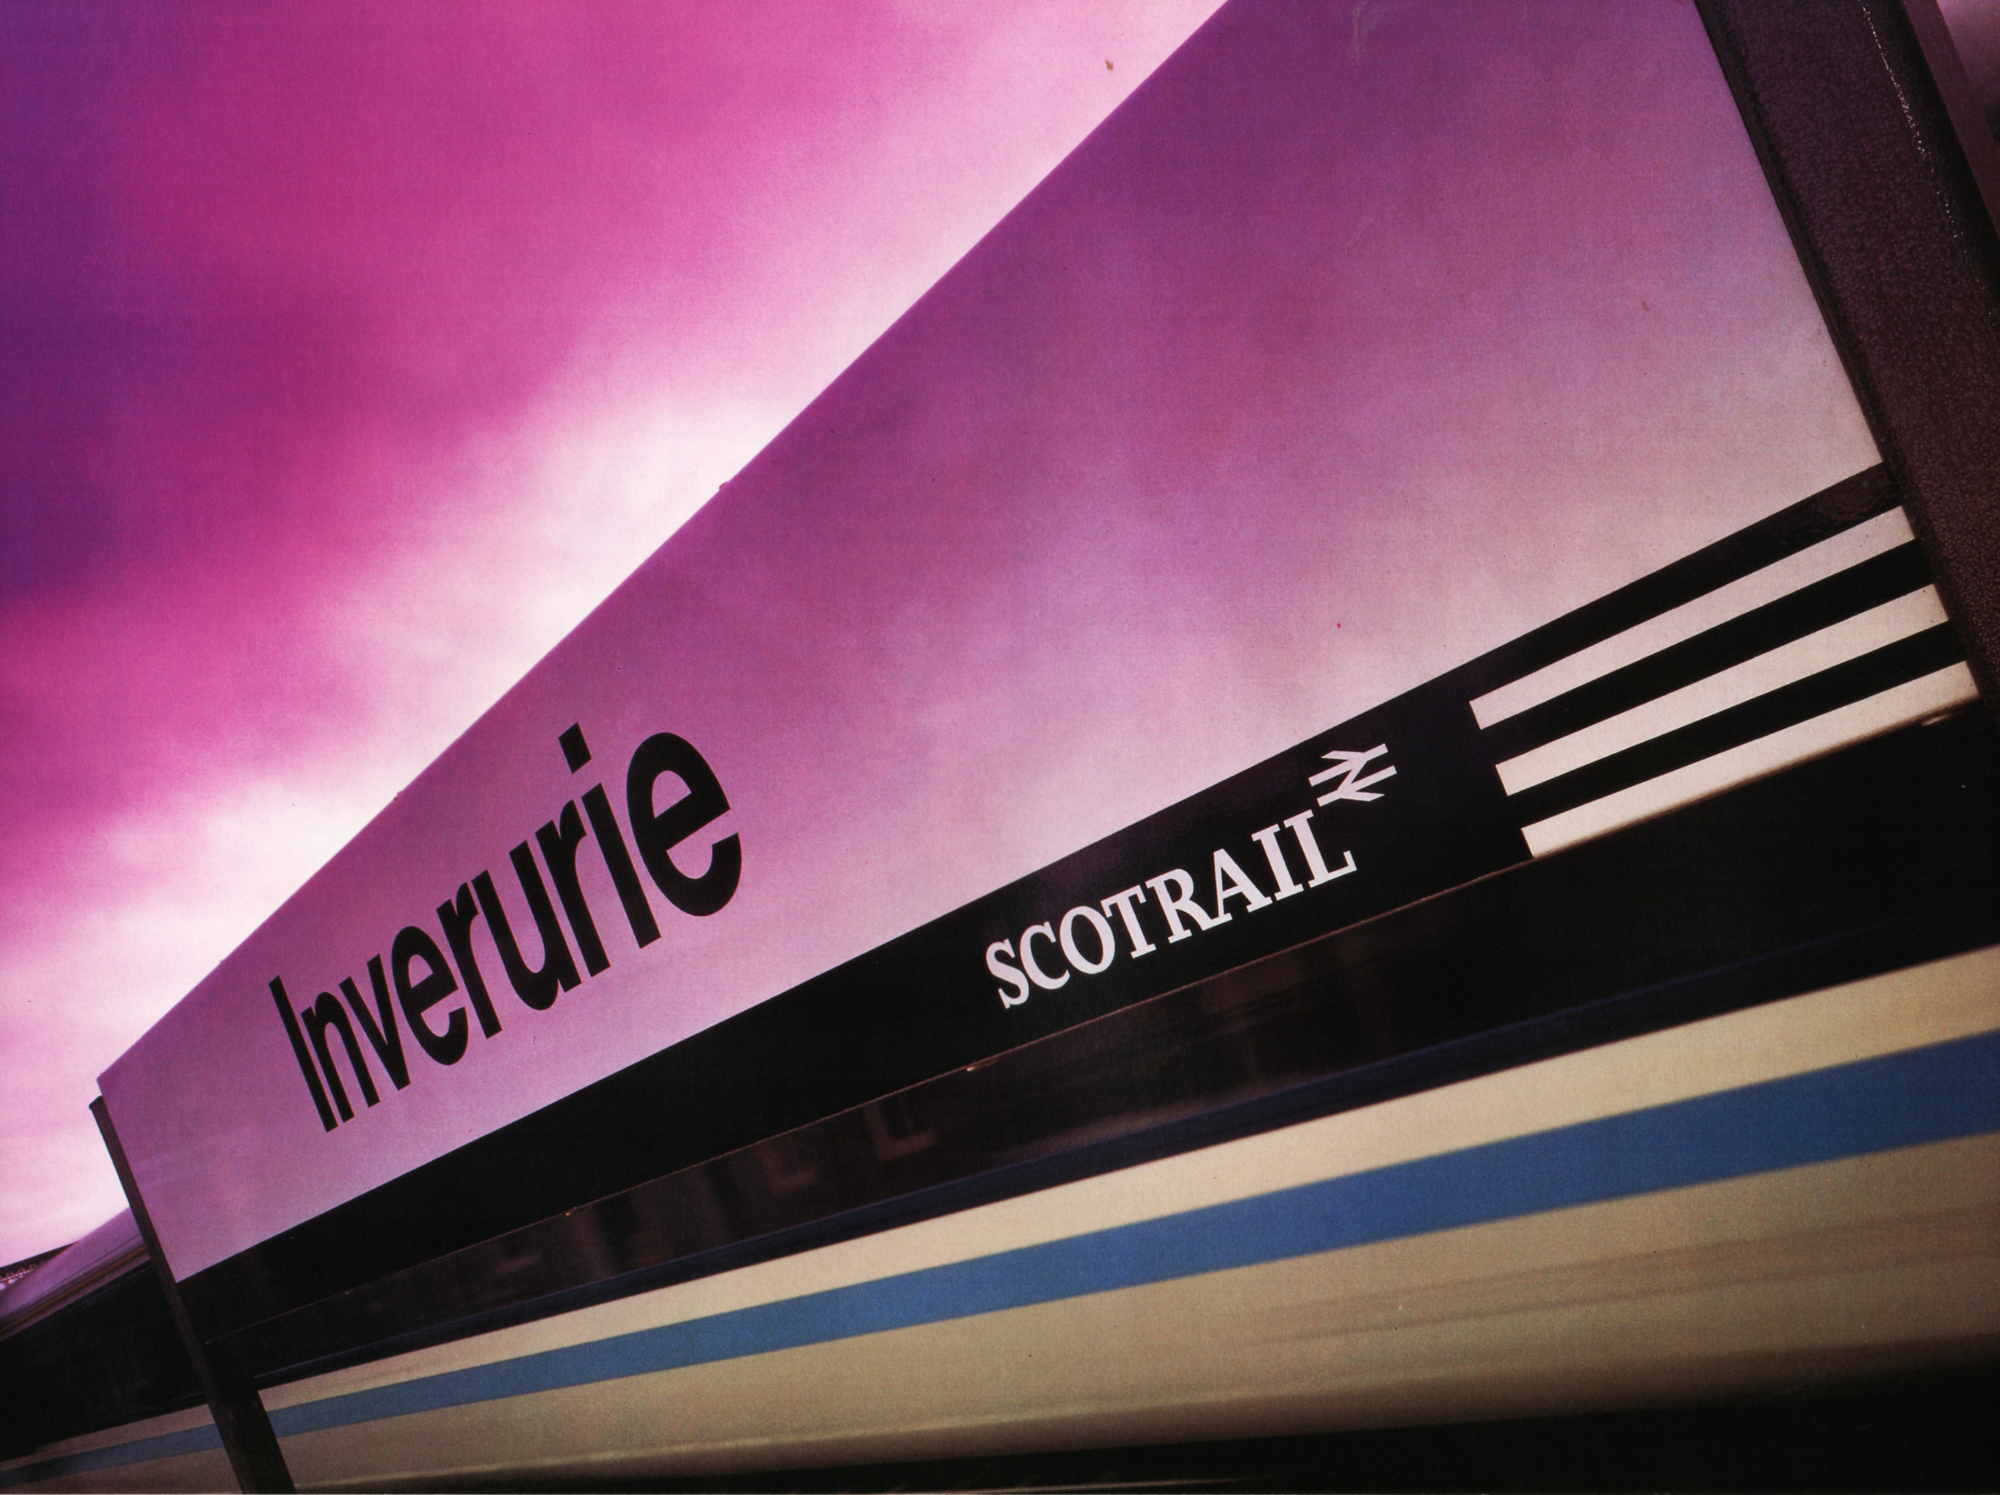 Inverurie on ScotRail